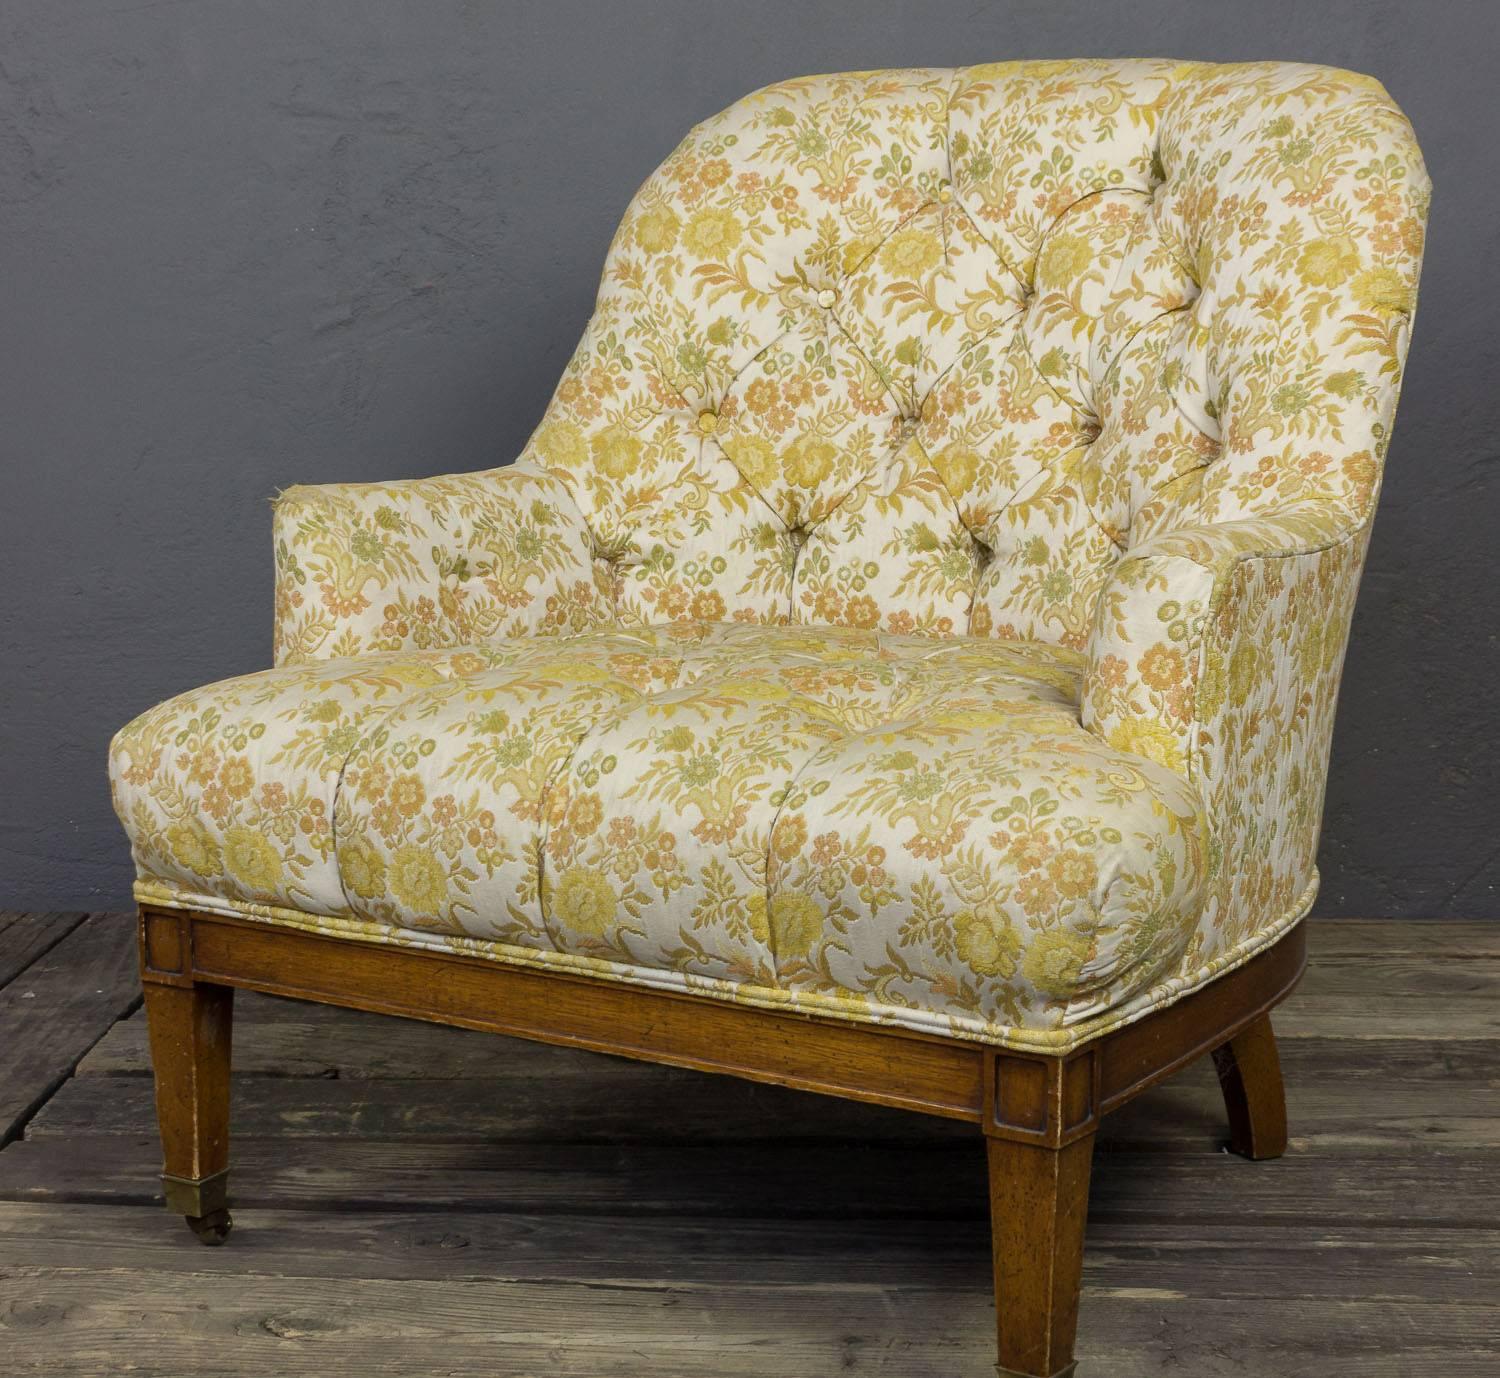 The pair of 1940s American tub chairs with tufted backs and wooden trim and legs. These chairs are in great condition; structure is tight and upholstery is clean, albeit dated. Light marks visible to leg finish. Frame finish can be stained or